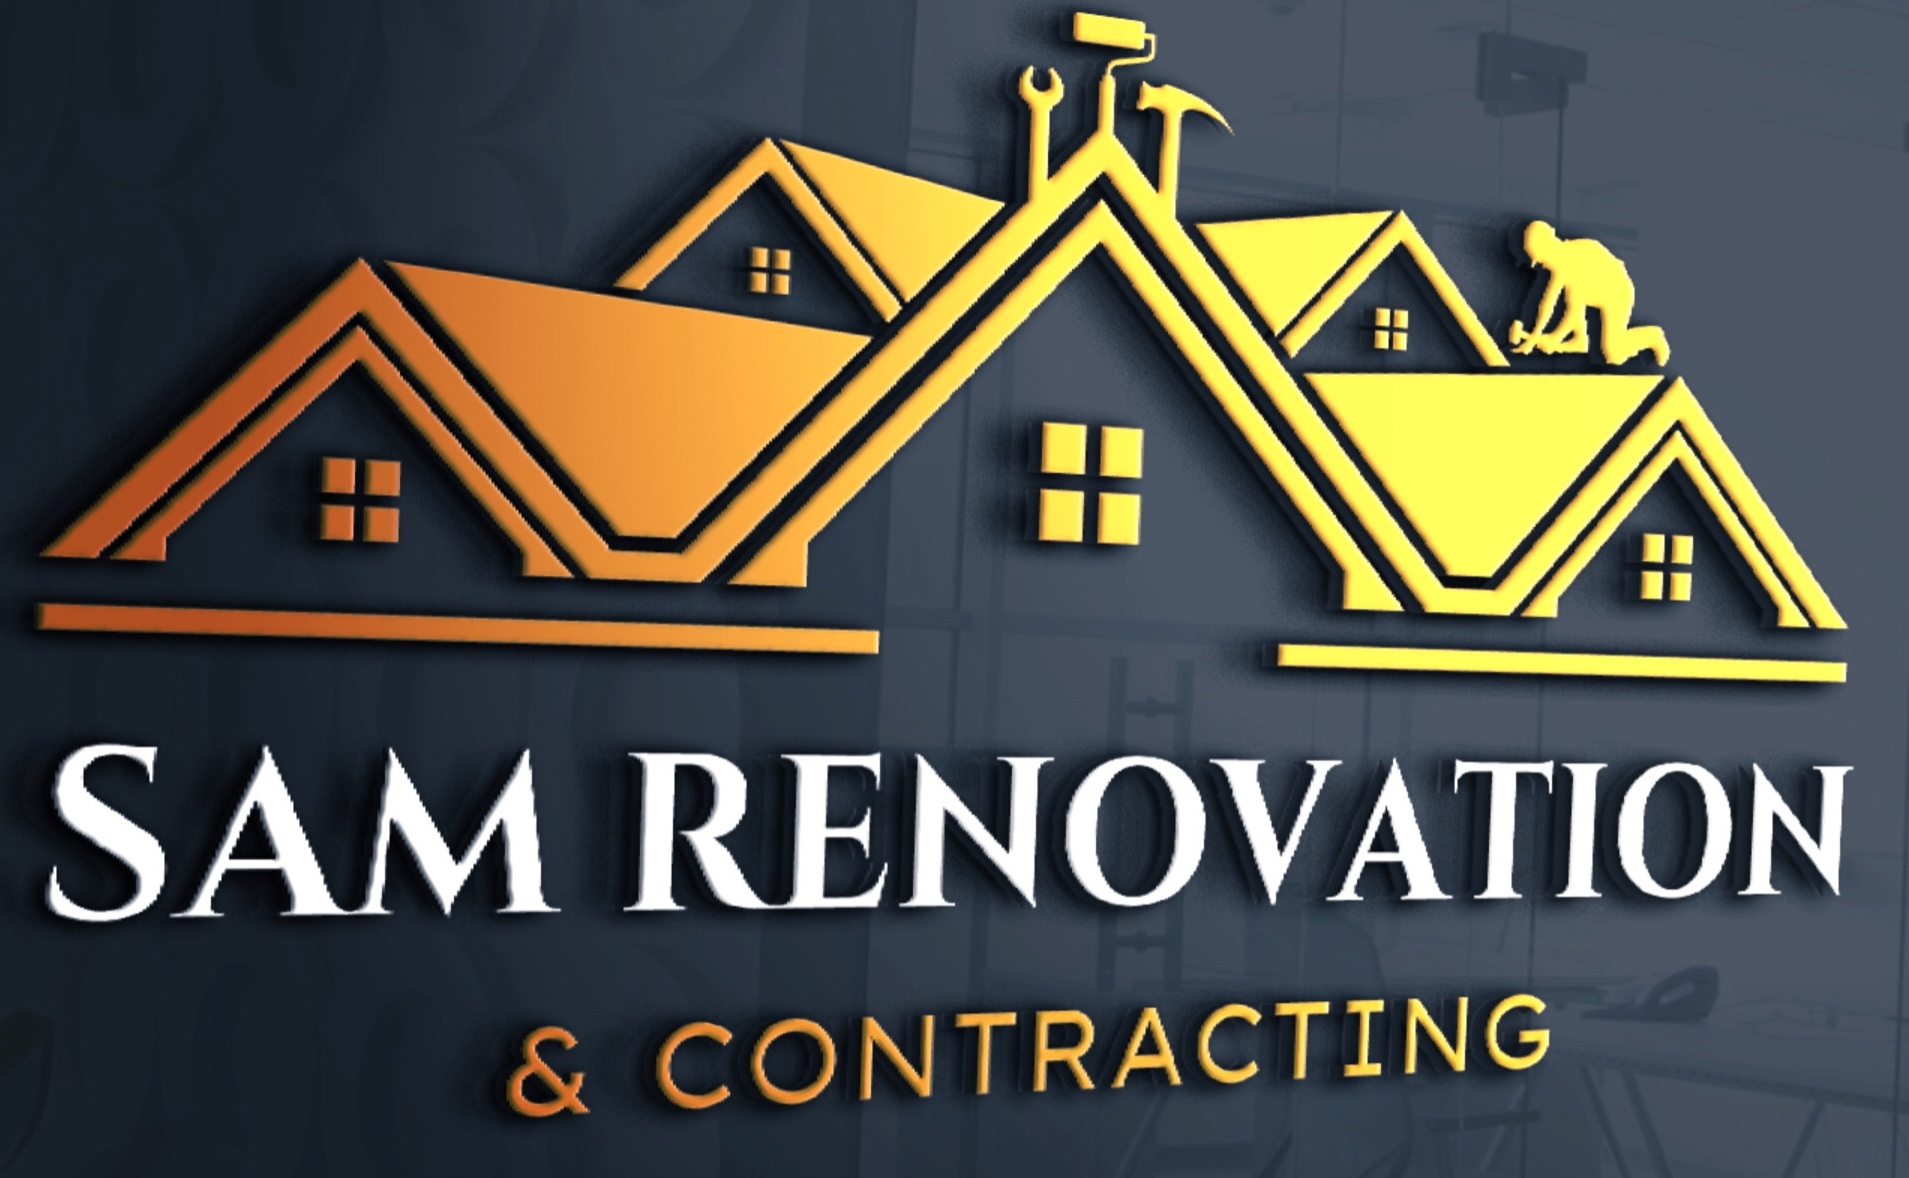 S.A.M Renovation & Contracting's logo